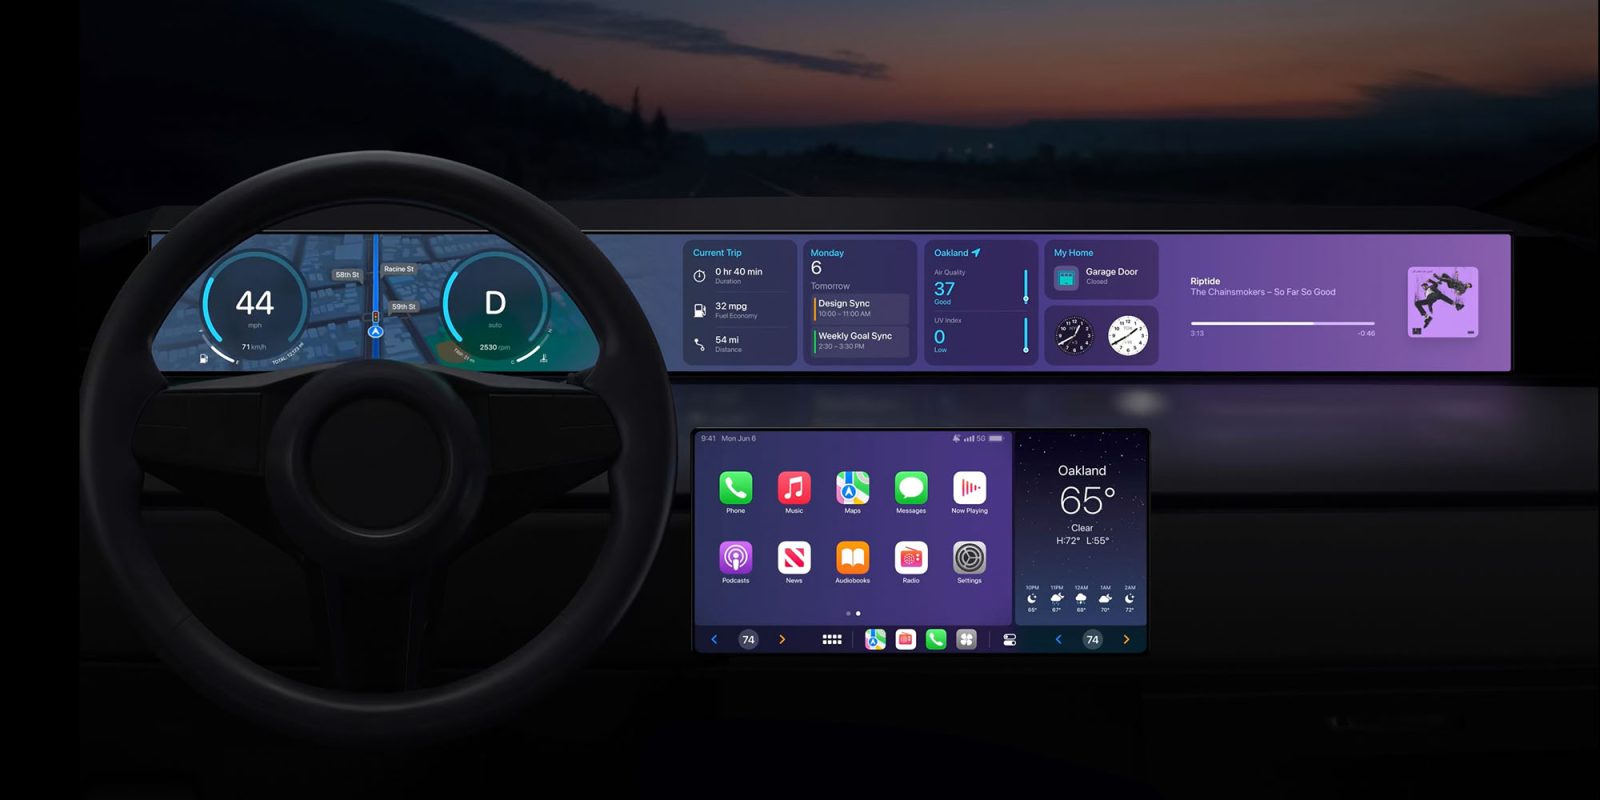 Punch-through could be key to next-gen CarPlay (dash example shown)